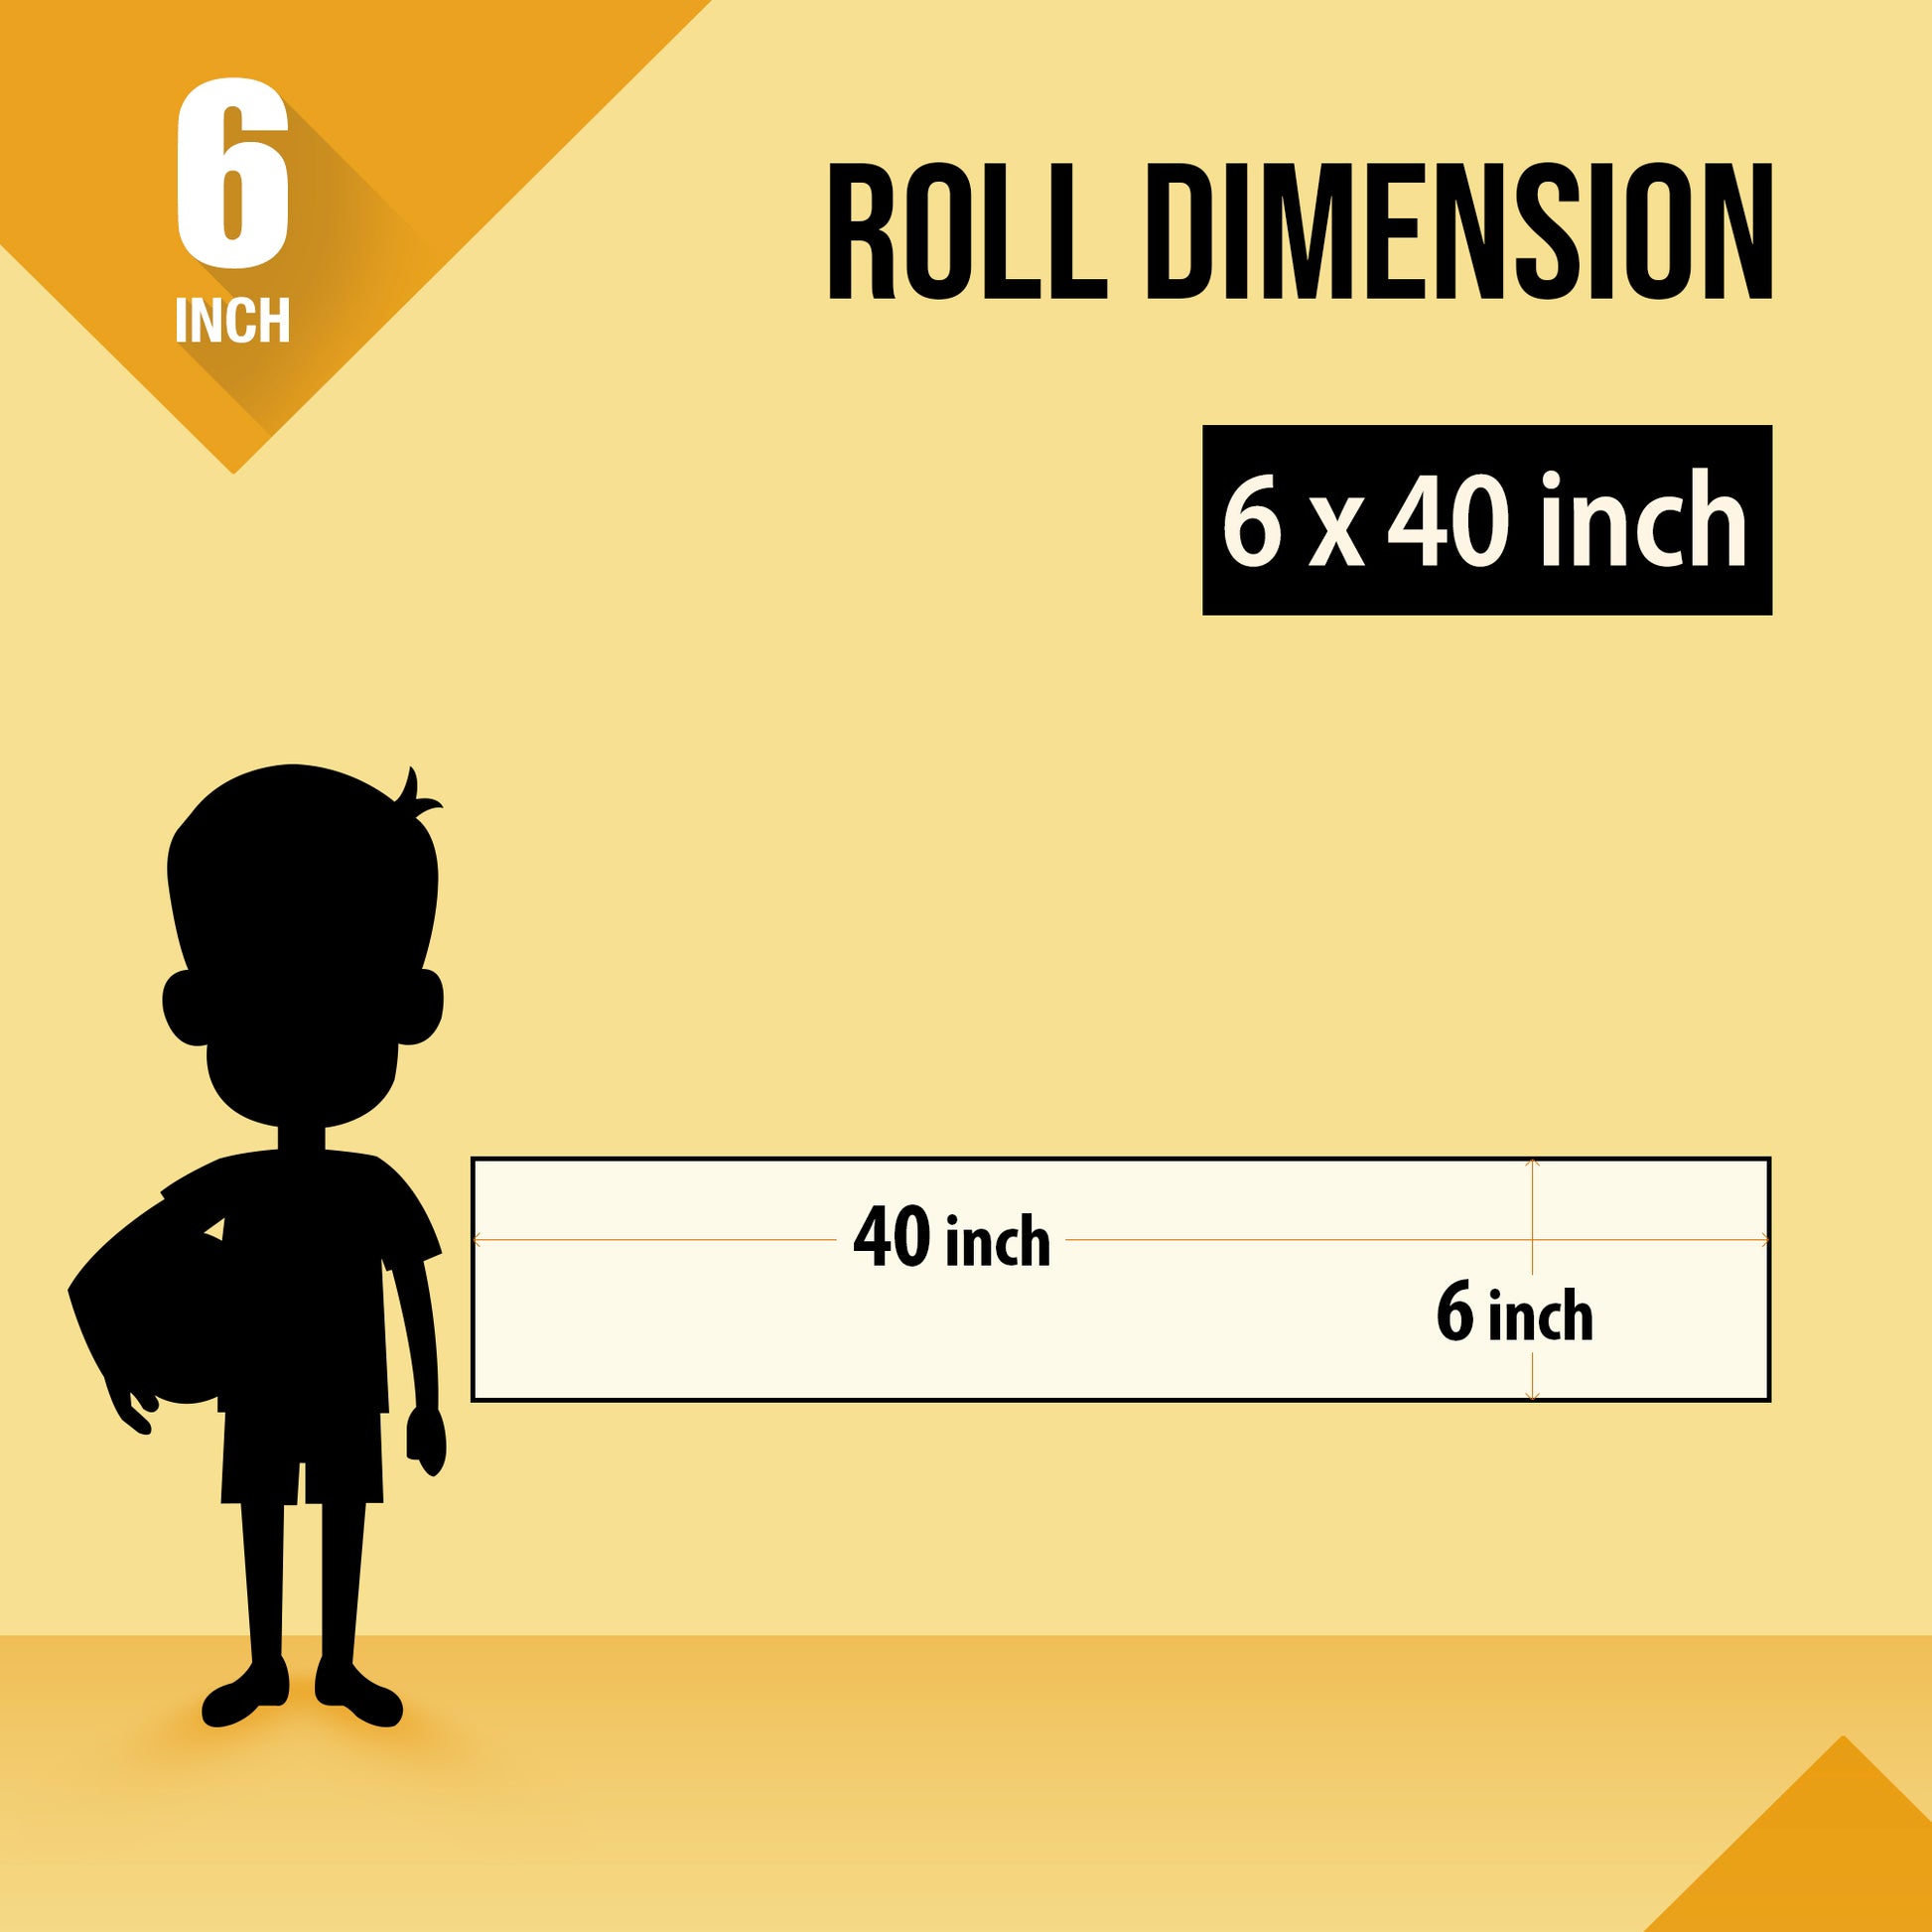 The image depicts a yellow background with a ruler showing a child's height next to a 6*40 inches paper roll attached to the wall.